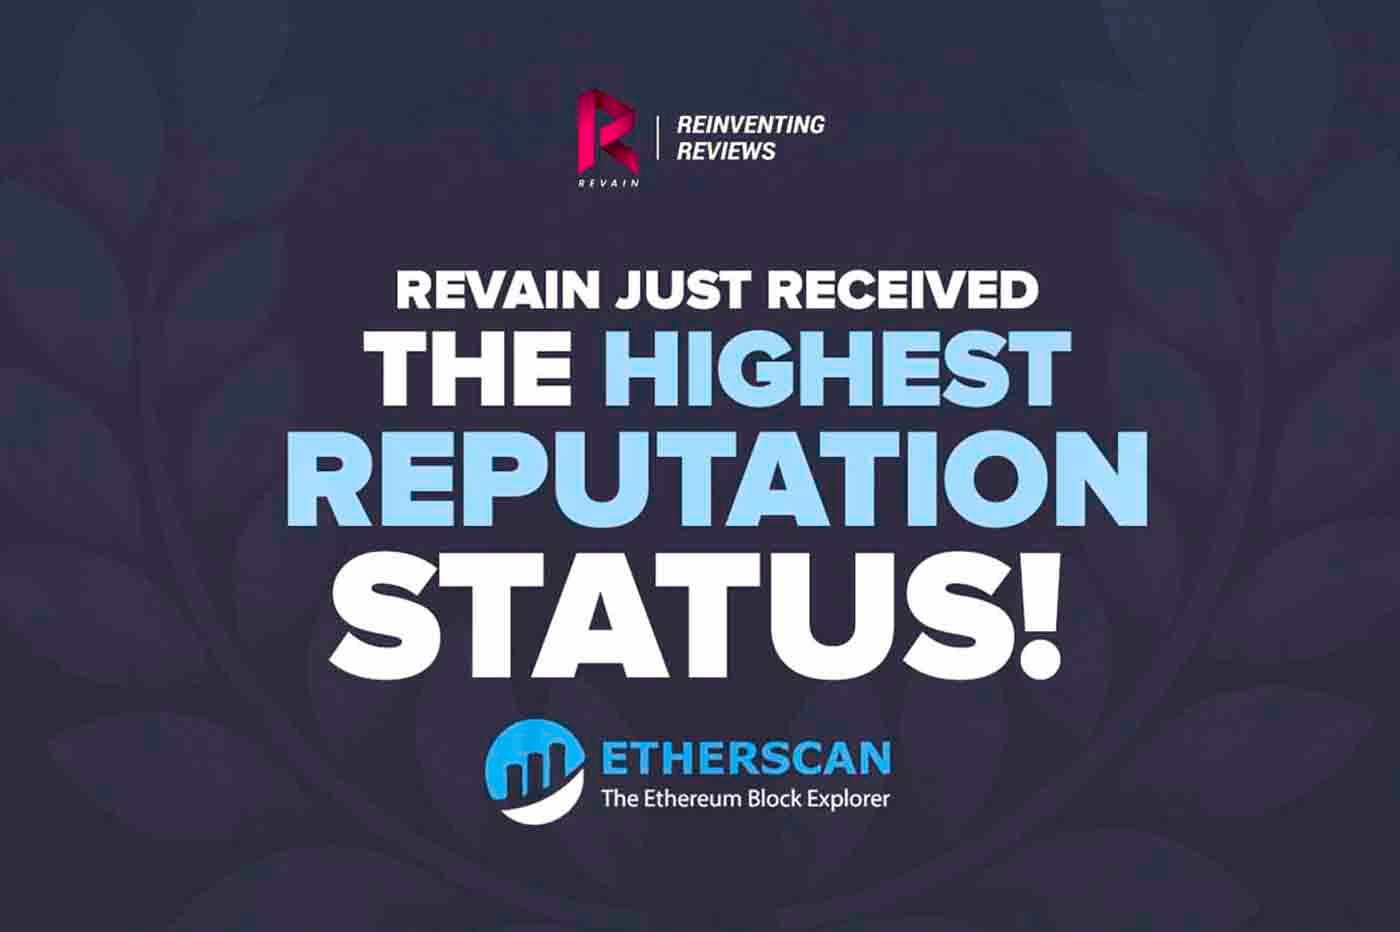 Article Revain status on Etherscan was just upgraded